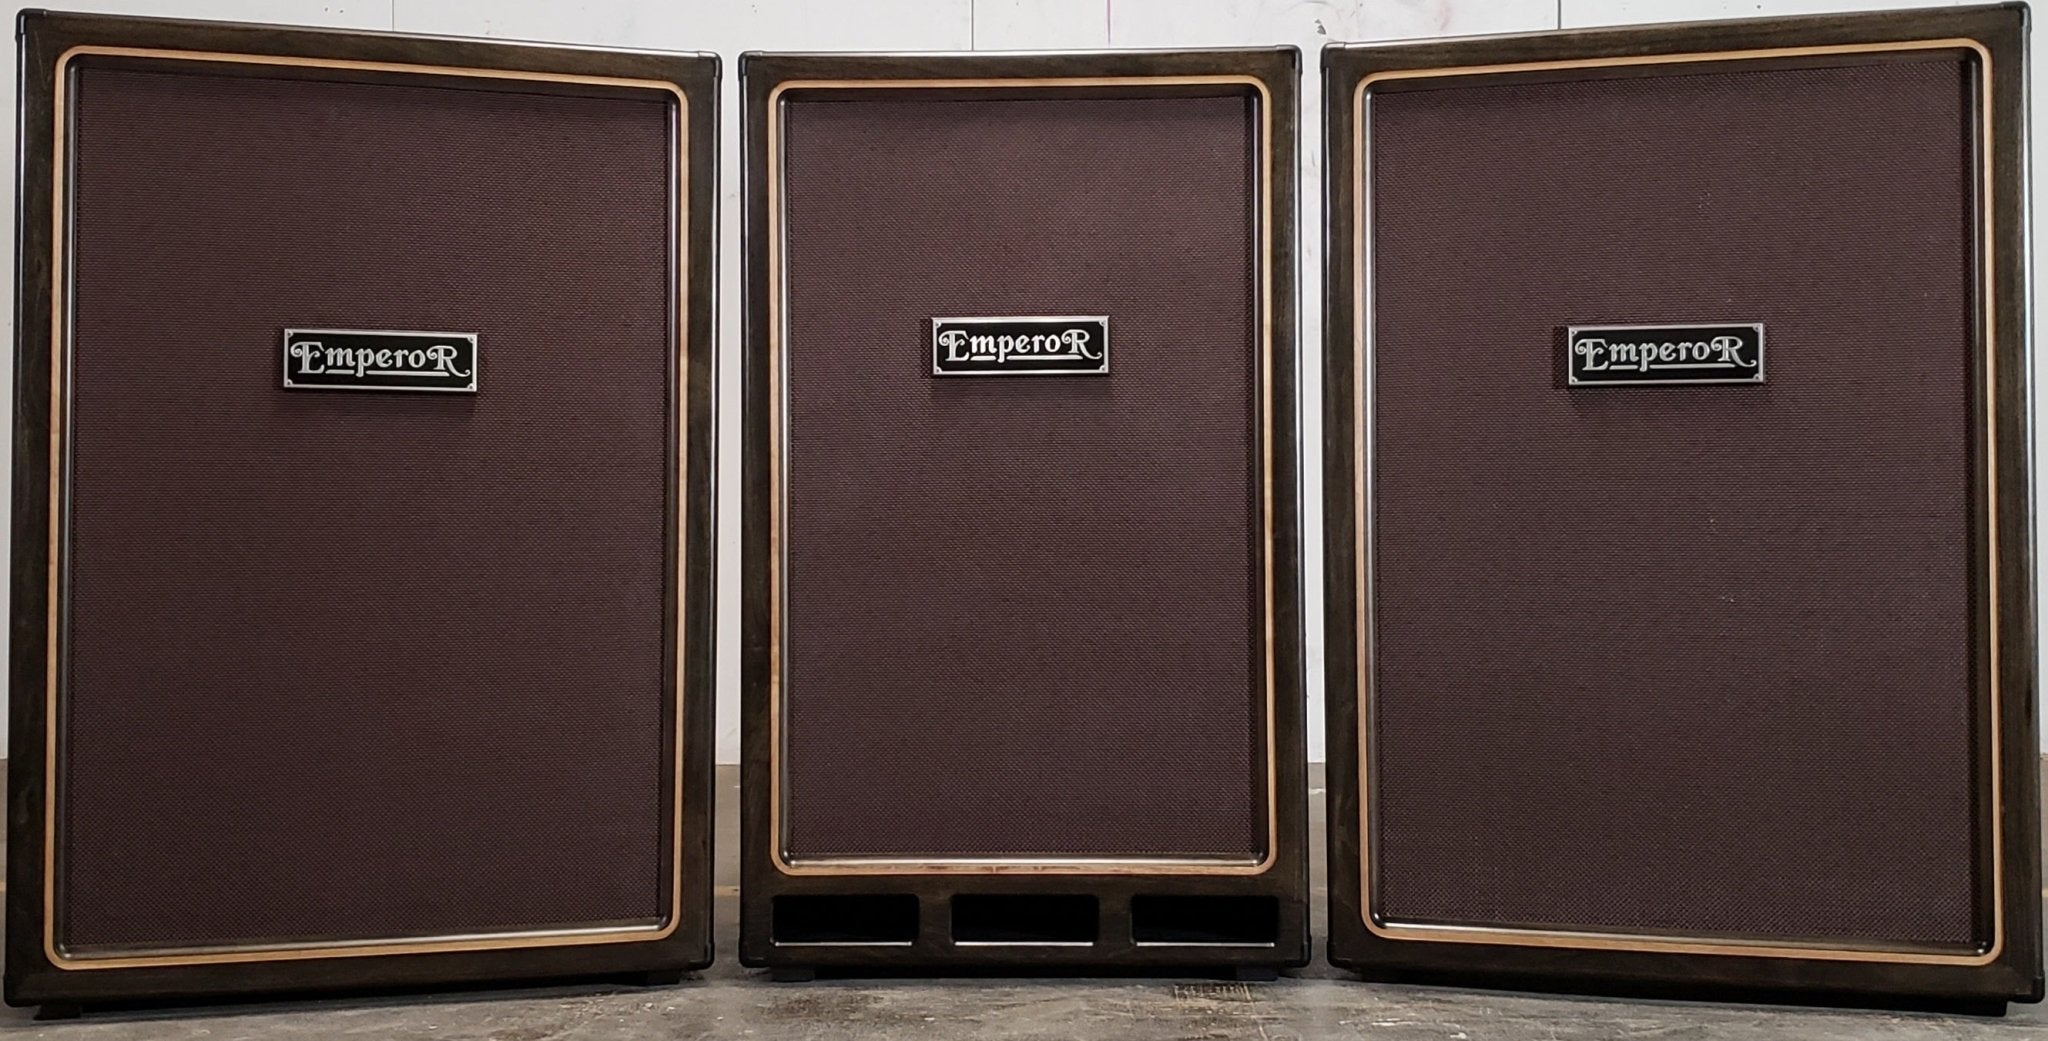 two 6x12 guitar speaker cabinets next to a 2x15 bass speaker cabinet